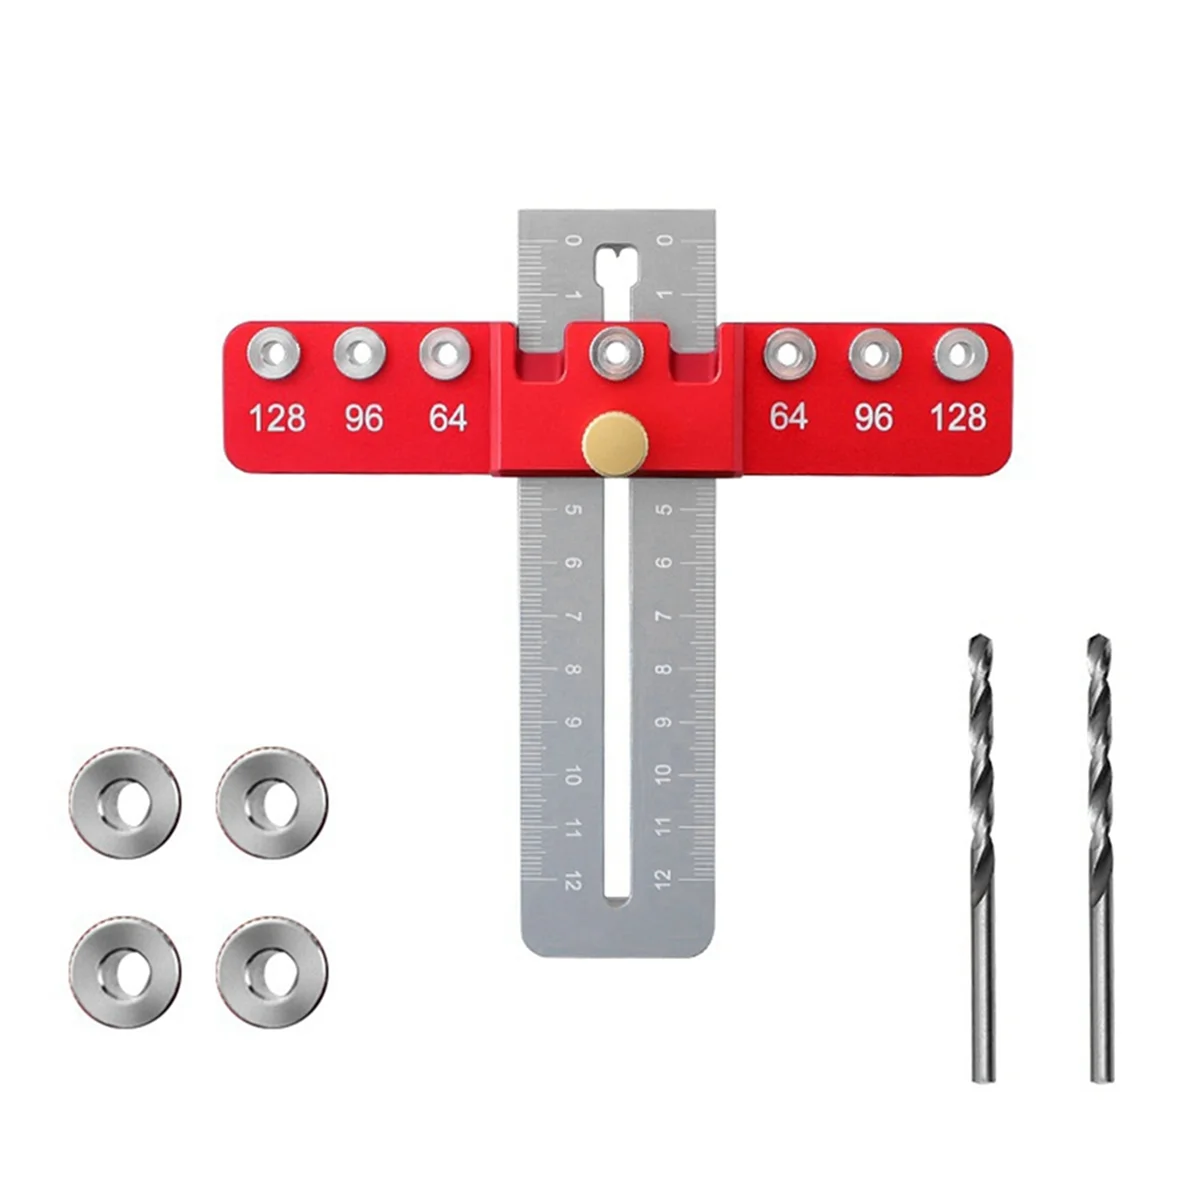 

Punching Locator Set Aluminum Alloy Chest of Drawers Door Handle Installation Auxiliary Tool Woodworking Handle Punch